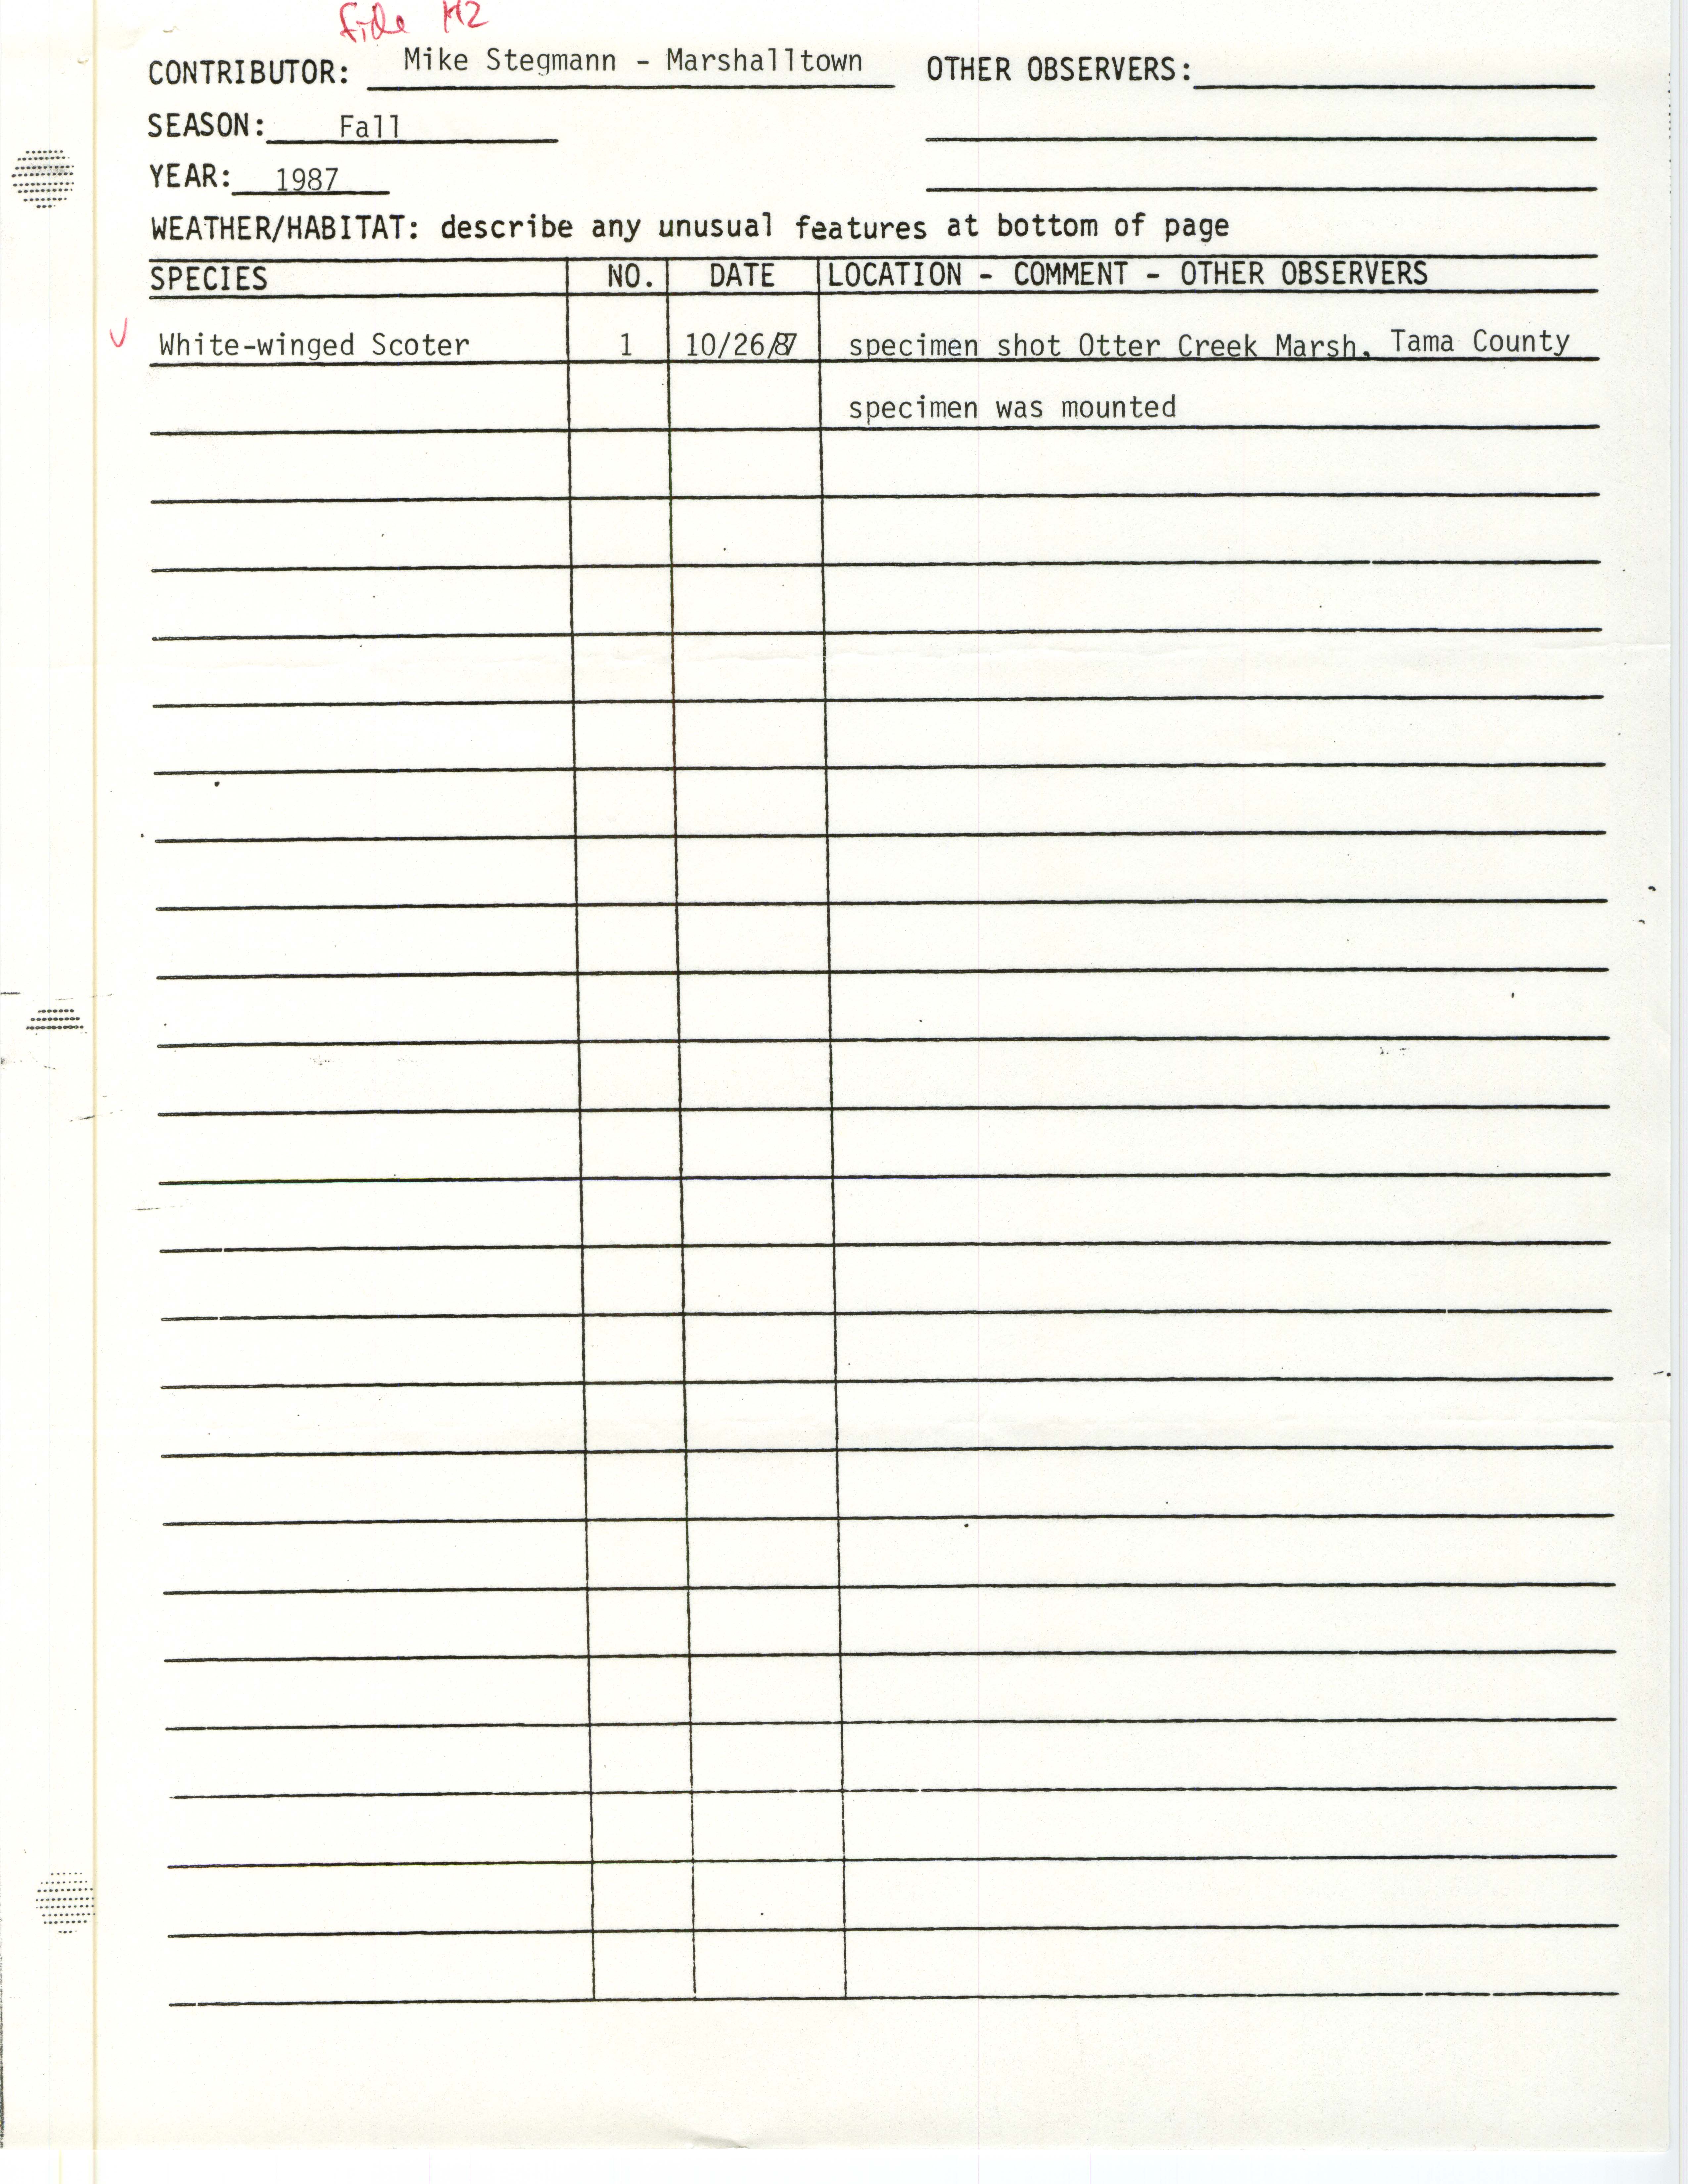 Field note contributed by Mike Stegmann, fall 1987